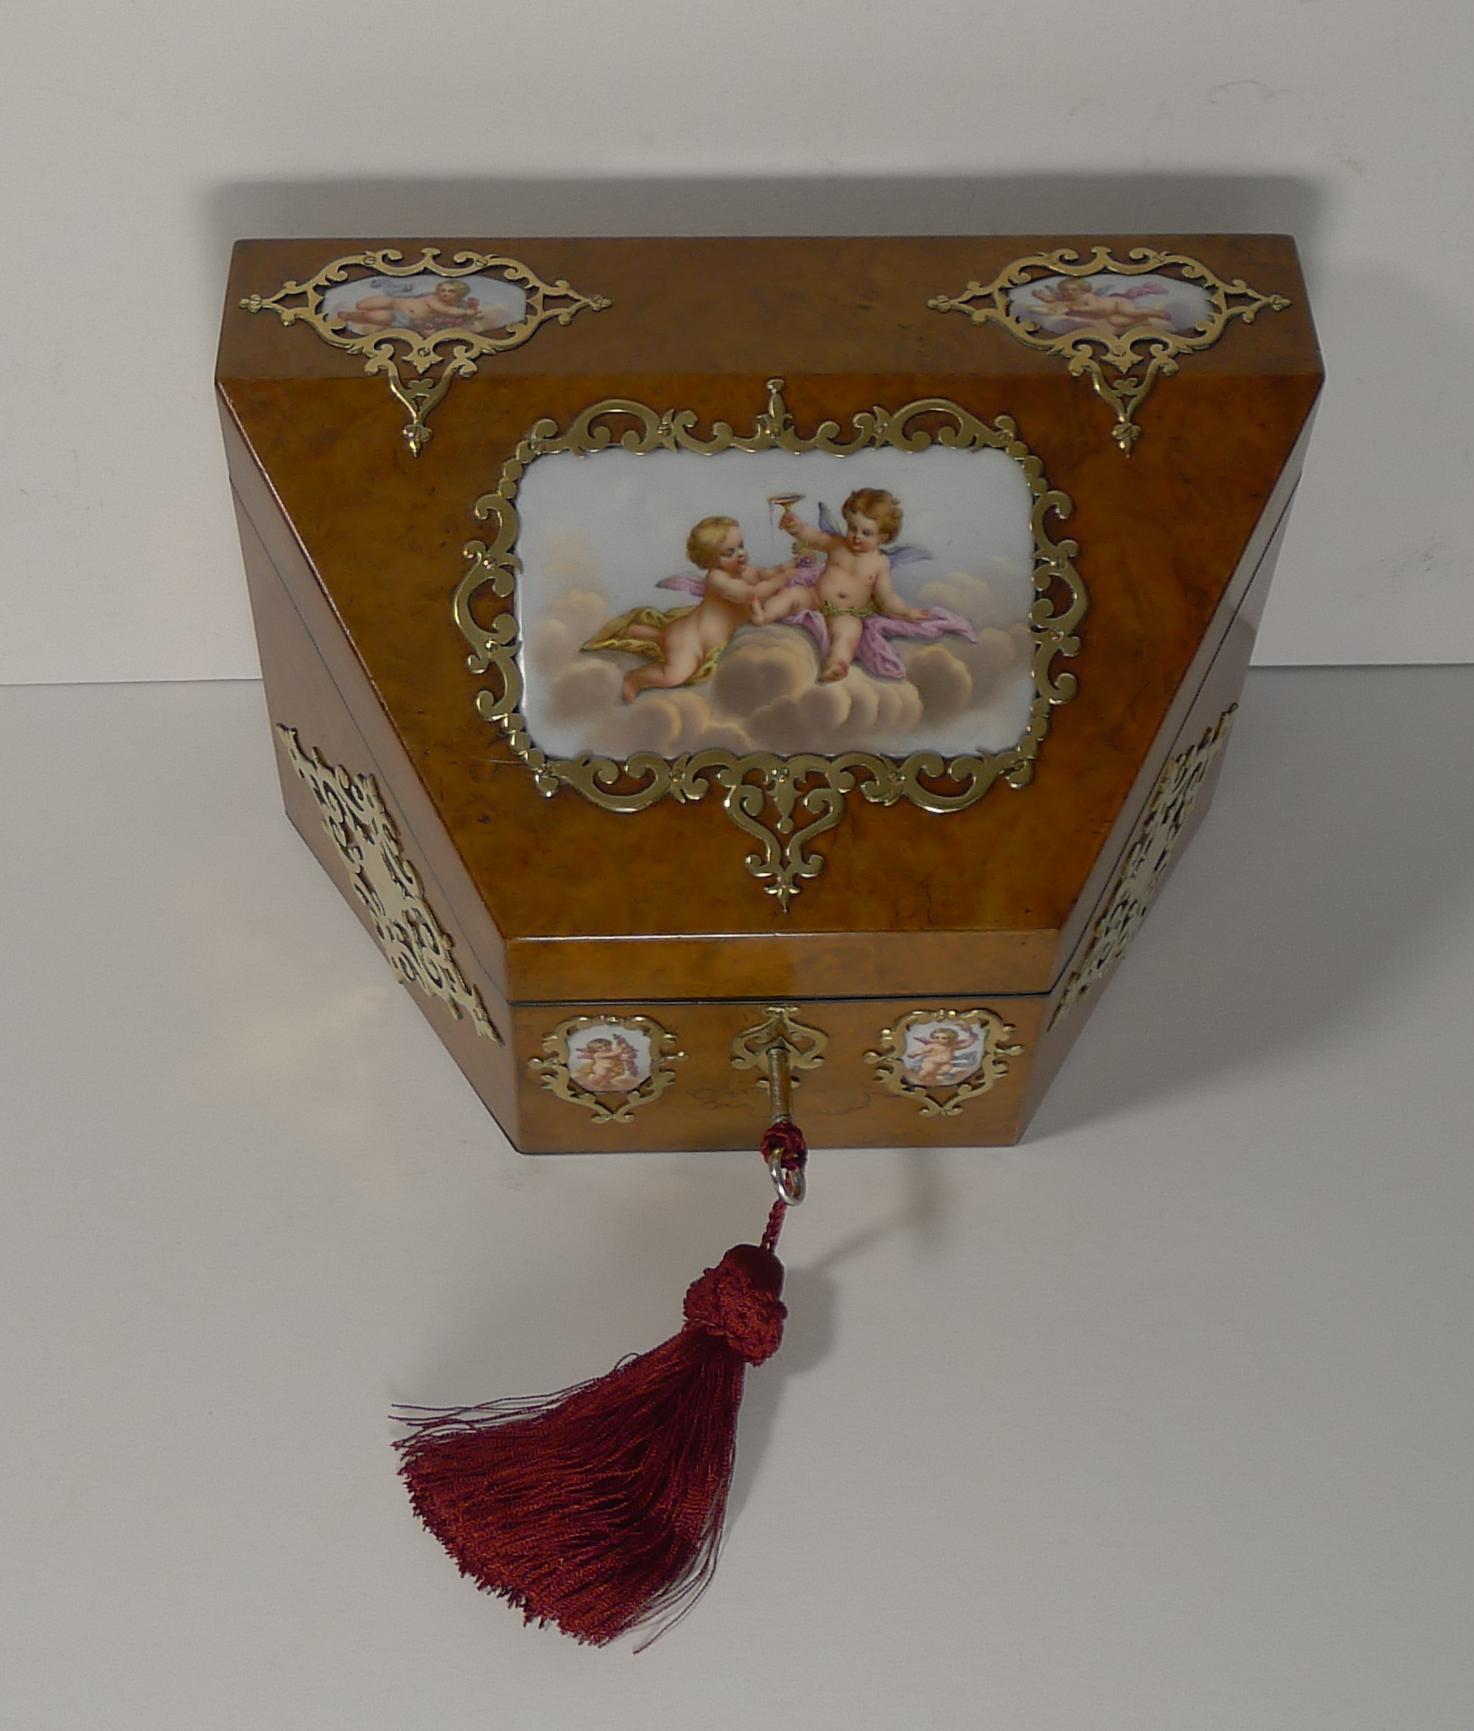 Antique English Burr Walnut & Hand Painted Porcelain Stationery Box, circa 1850 For Sale 4